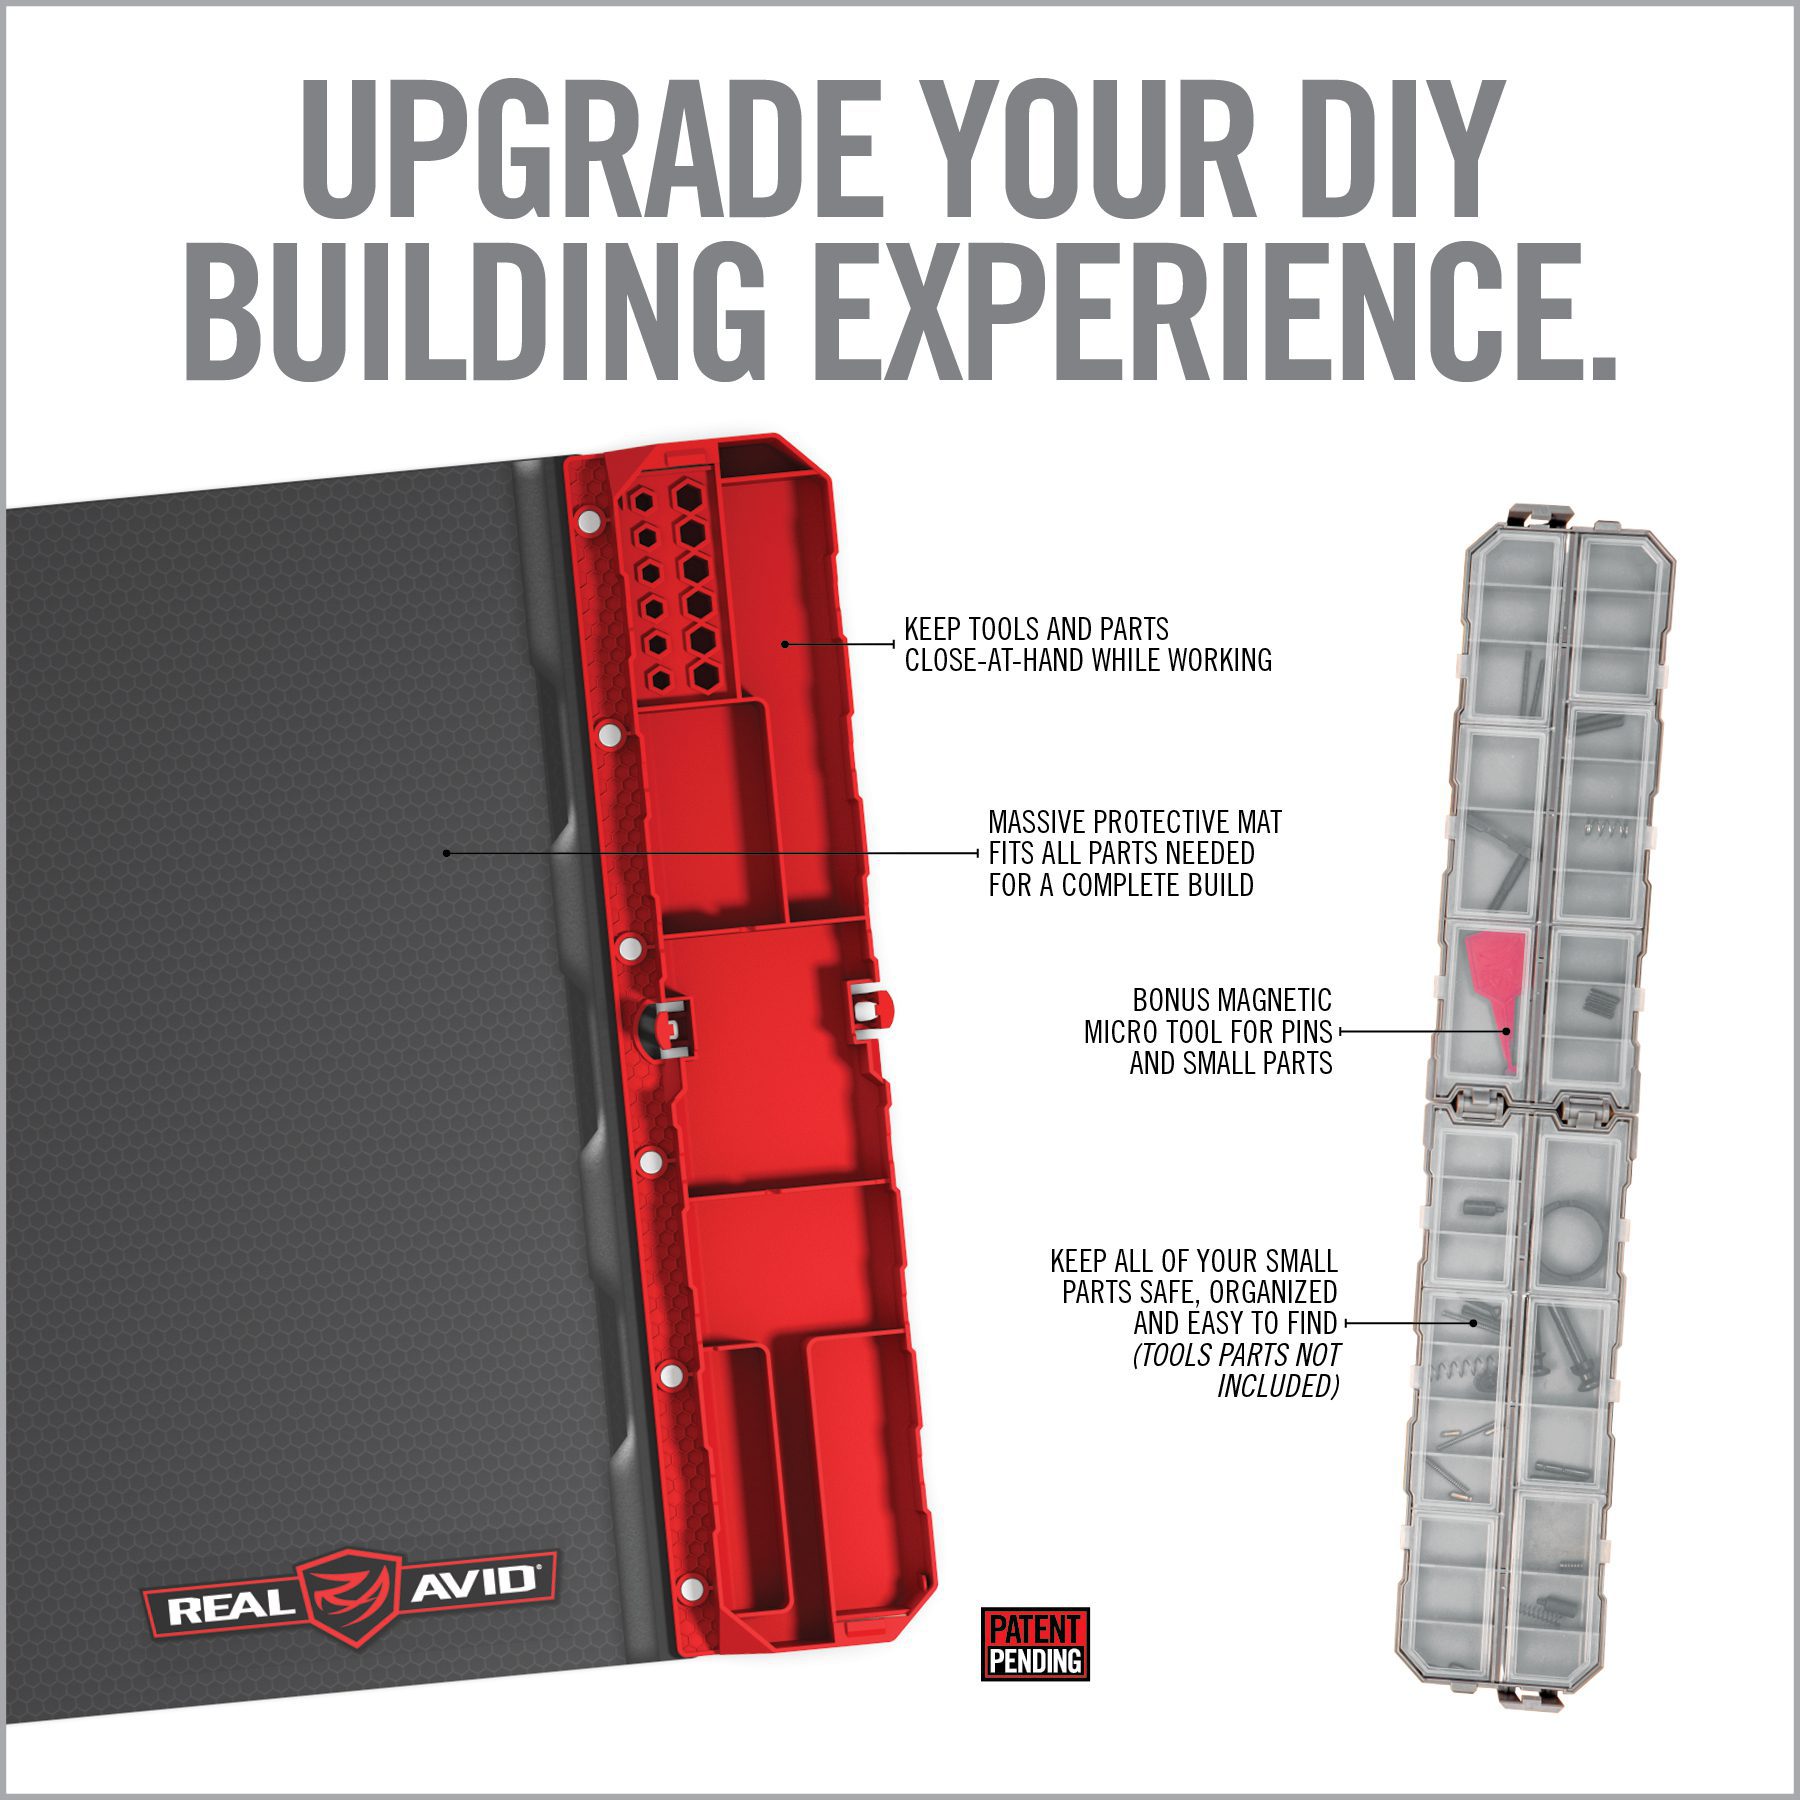 an advertisement with instructions on how to build a diy building experience